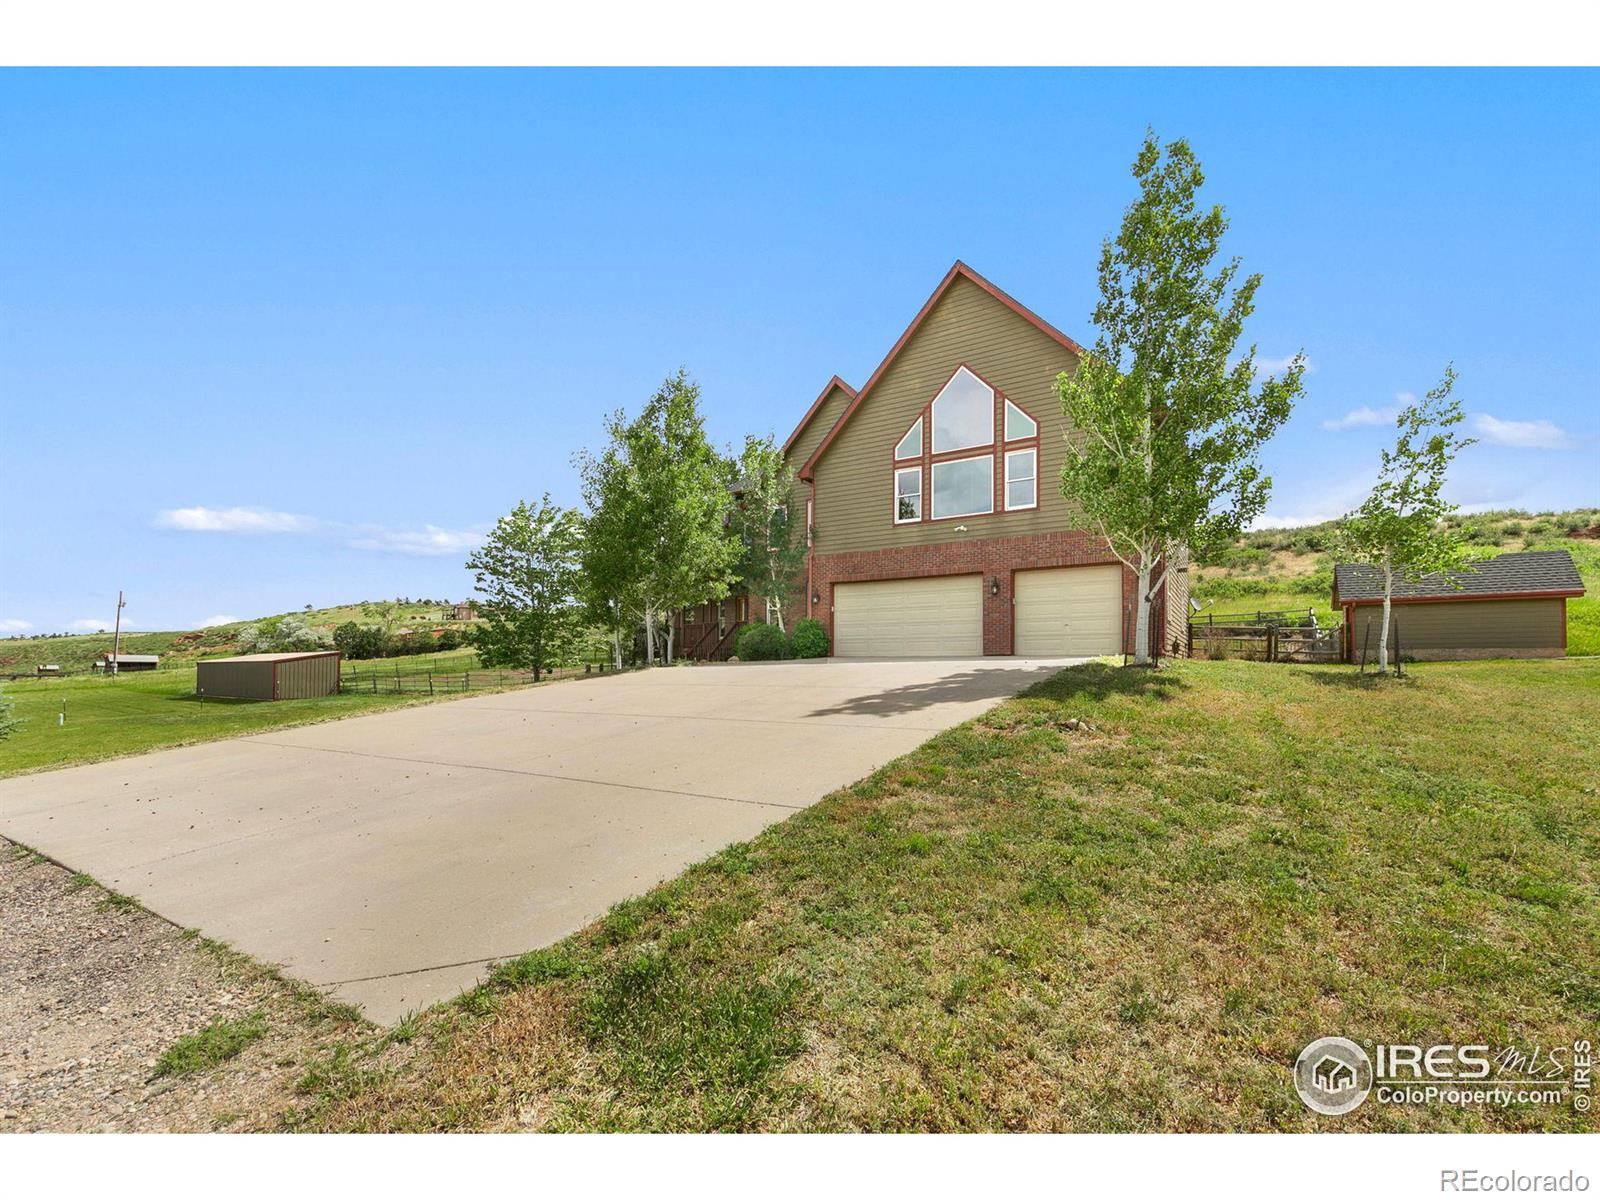 Report Image for 4044 S County Road 29 ,Loveland, Colorado